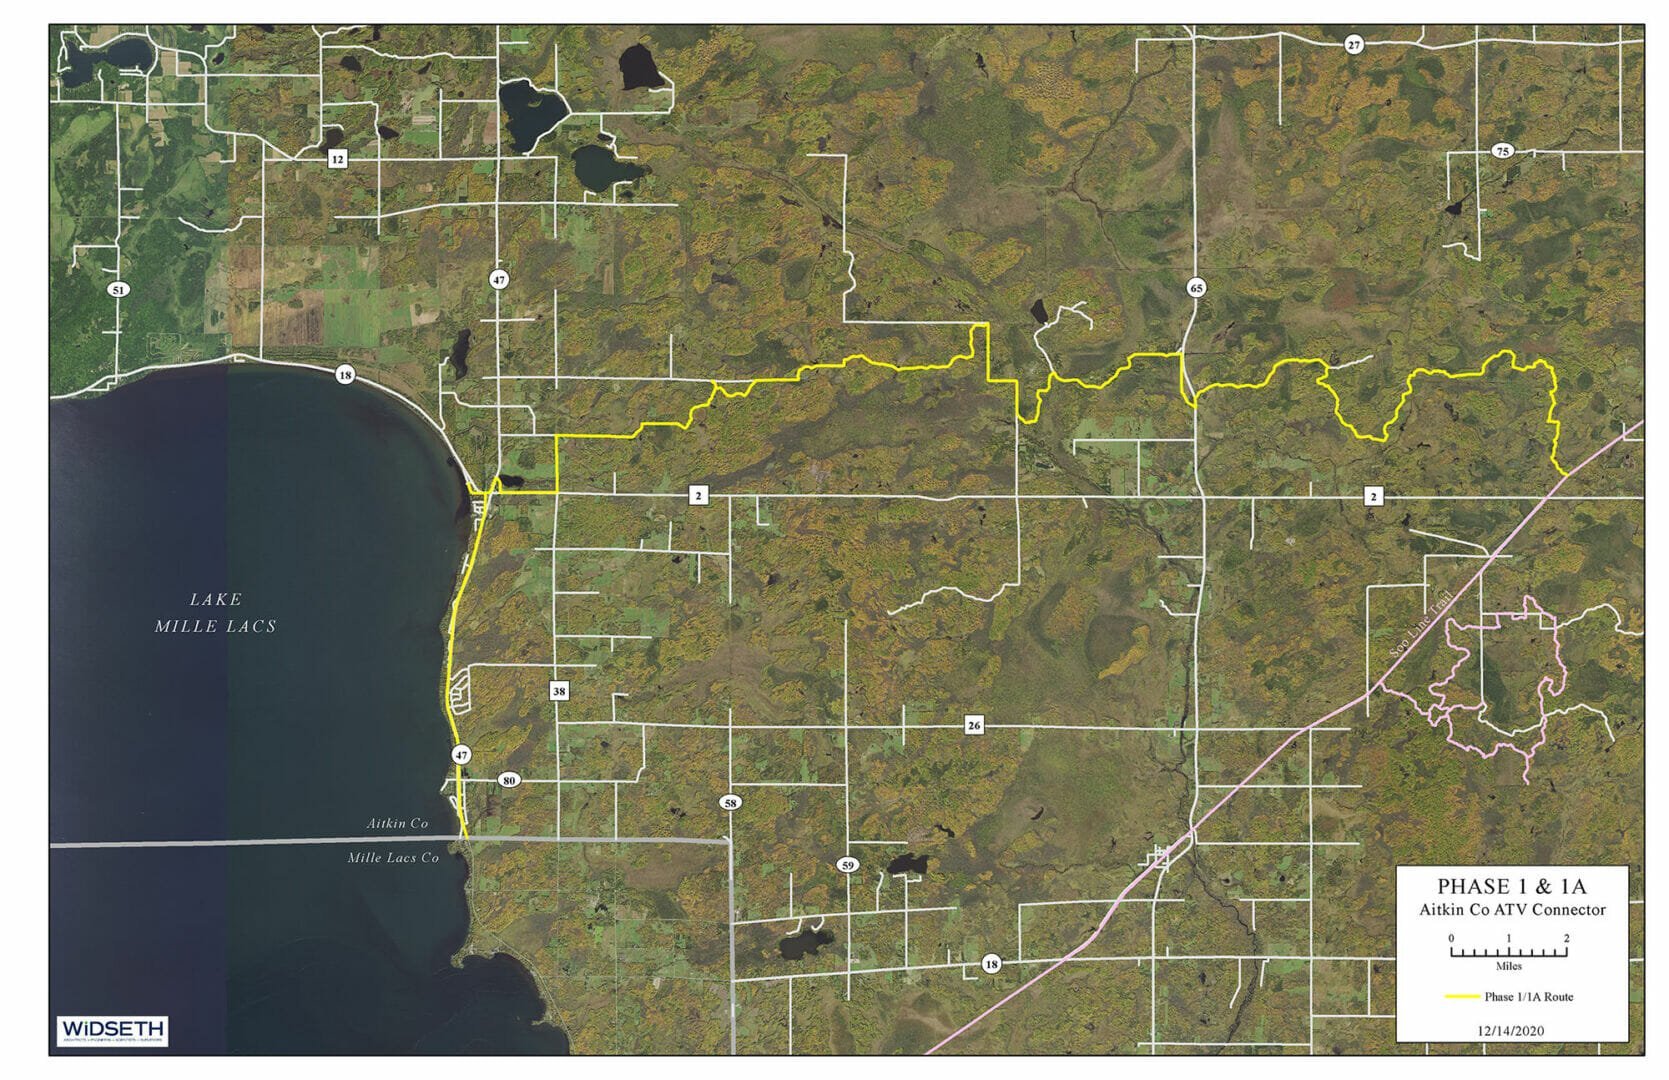 Aitkin Co ATV Connector Phase1 Map